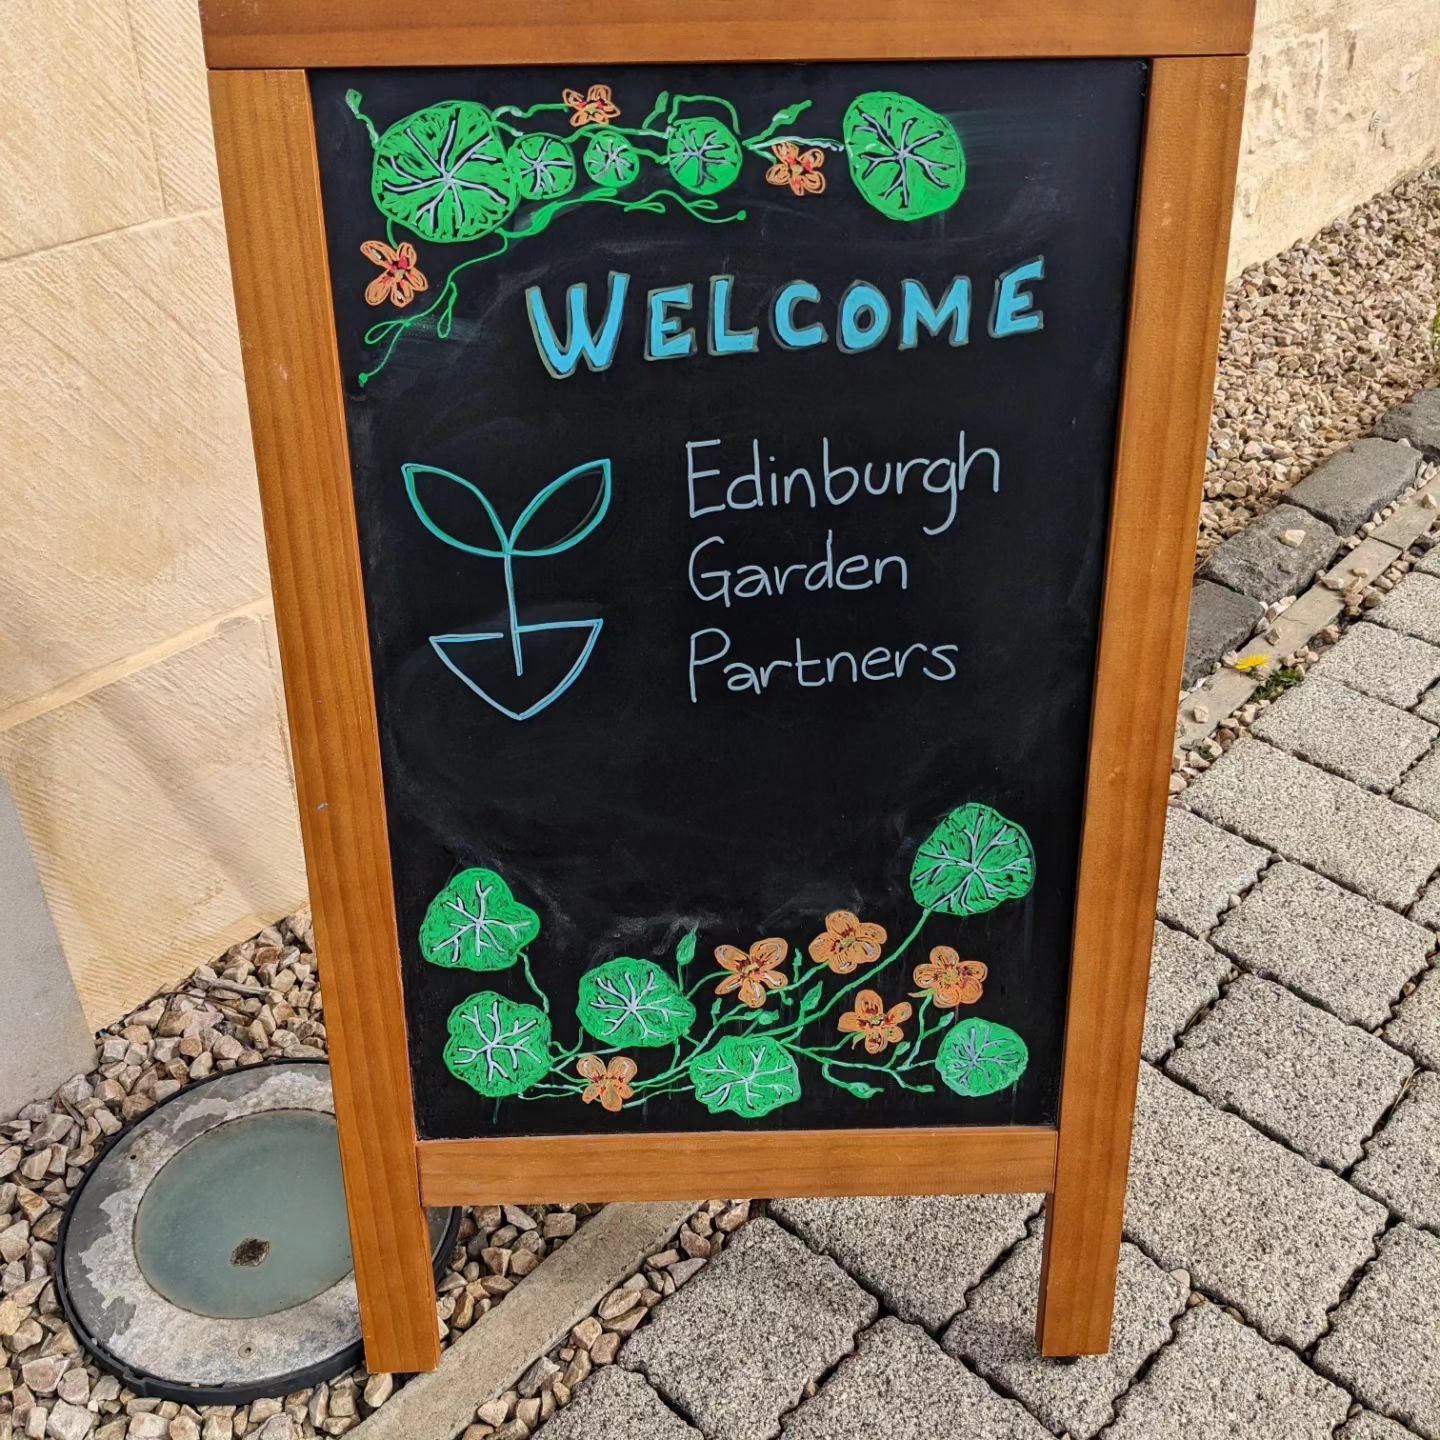 Brilliant 'Planning your Plot' session at the @rbgedinburgh on Saturday! Fantastic knowledge  and resource sharing! And thanks to all the EGP volunteers who came along😊🌱 we had a great time chatting about what everyone's planning to grow this year 